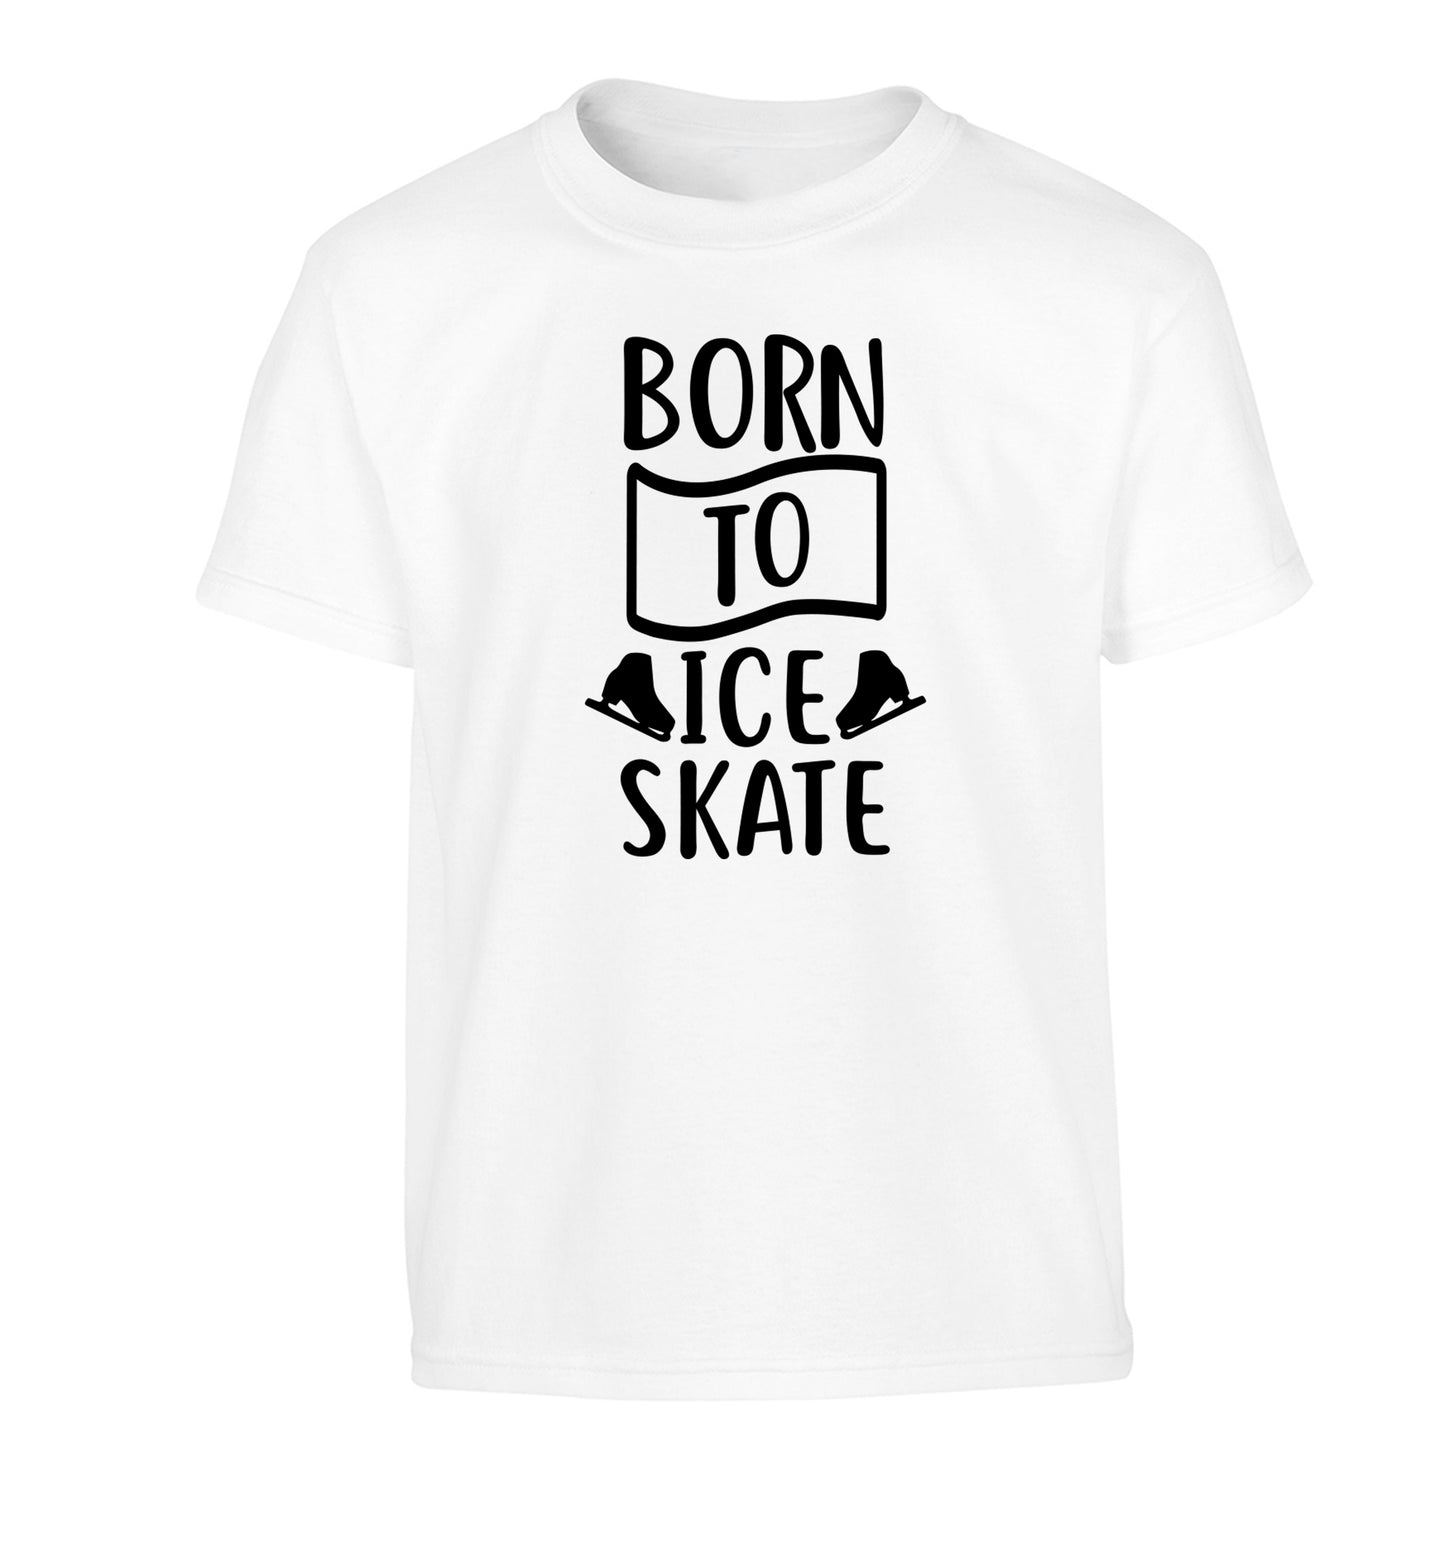 I ice skate because I like it not because I'm good at it Children's white Tshirt 12-14 Years